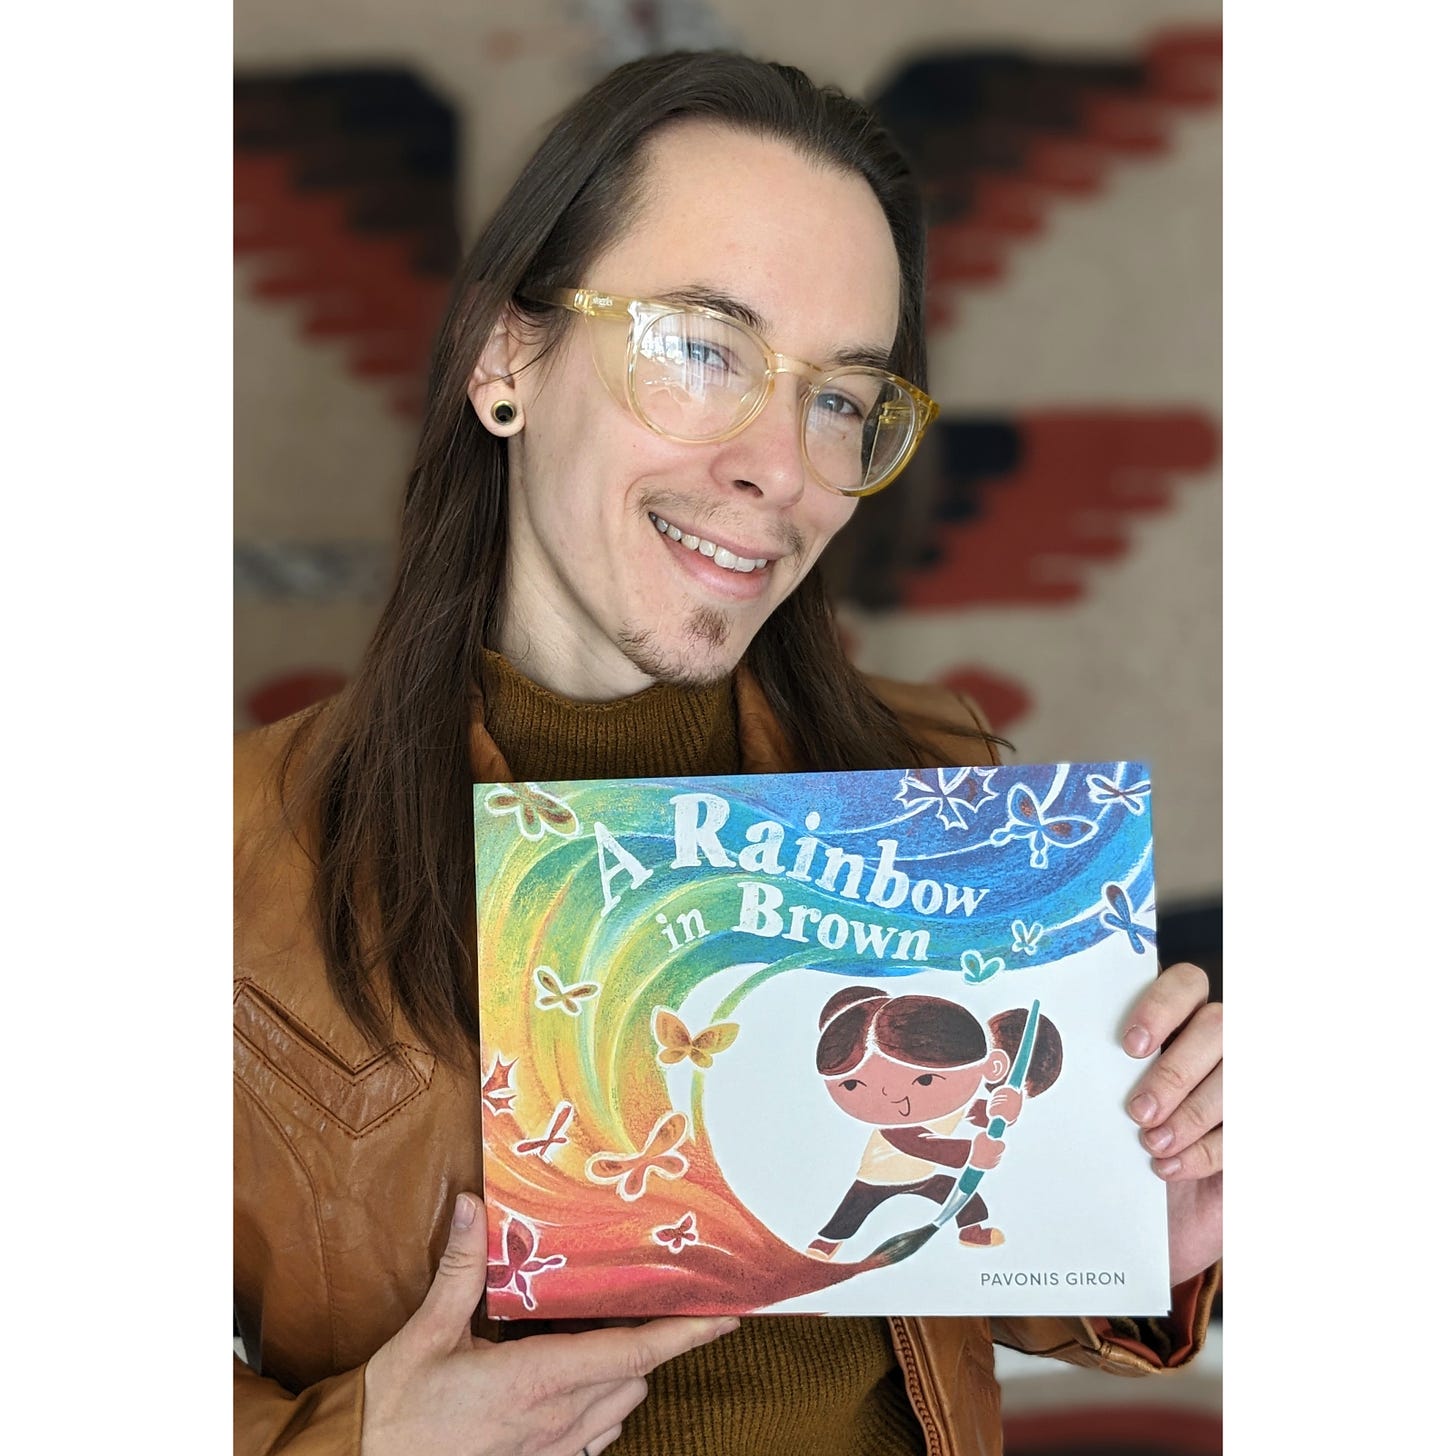 Author-illustrator Pavonis Giron holding their debut picture book, A RAINBOW IN BROWN